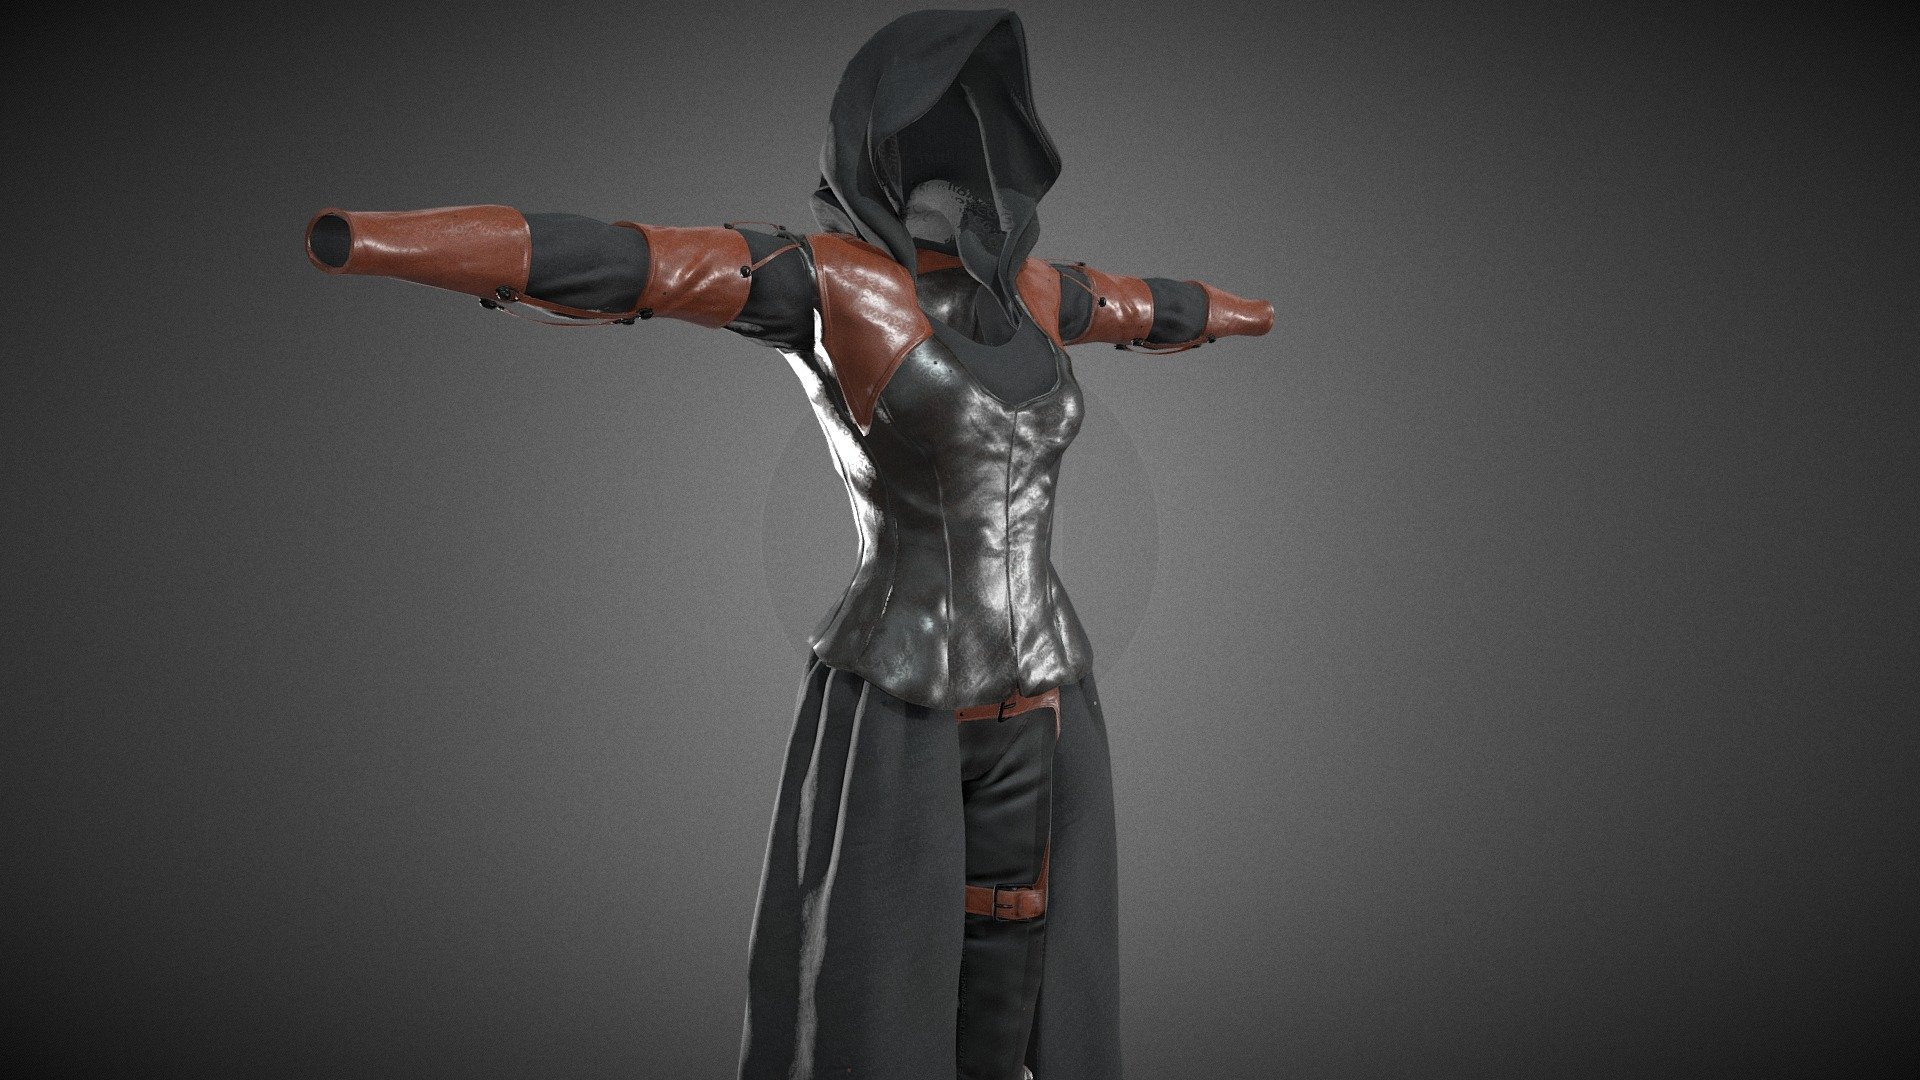 CG StudioX Present :
Female Assassin Outfit 1 Outfit lowpoly/PBR




This is Female Assassin Outfit 1 Comes with Specular and Metalness PBR.

The photo been rendered using Marmoset Toolbag 3 (real time game engine )


Features :



Comes with Specular and Metalness PBR 4K texture .

Good topology.

Low polygon geometry.

The Model is prefect for game for both Specular workflow as in Unity and Metalness as in Unreal engine .

The model also rendered using Marmoset Toolbag 3 with both Specular and Metalness PBR and also included in the product with the full texture.

The product has ID map in every part for changing any part in the model .

The texture can be easily adjustable .


Texture :



ALL Texture [Albedo -Normal-Metalness -Roughness-Gloss-Specular-ID-AO] (4096*4096)

Three objects (Top-Pants-Boots) each one has it own UV set and textures.


Files :
Marmoset Toolbag 3 ,Maya,,FBX,OBj with all the textures.




Contact me for if you have any questions.
 - Female Assassin Outfit 1 - Buy Royalty Free 3D model by CG StudioX (@CG_StudioX) 3d model